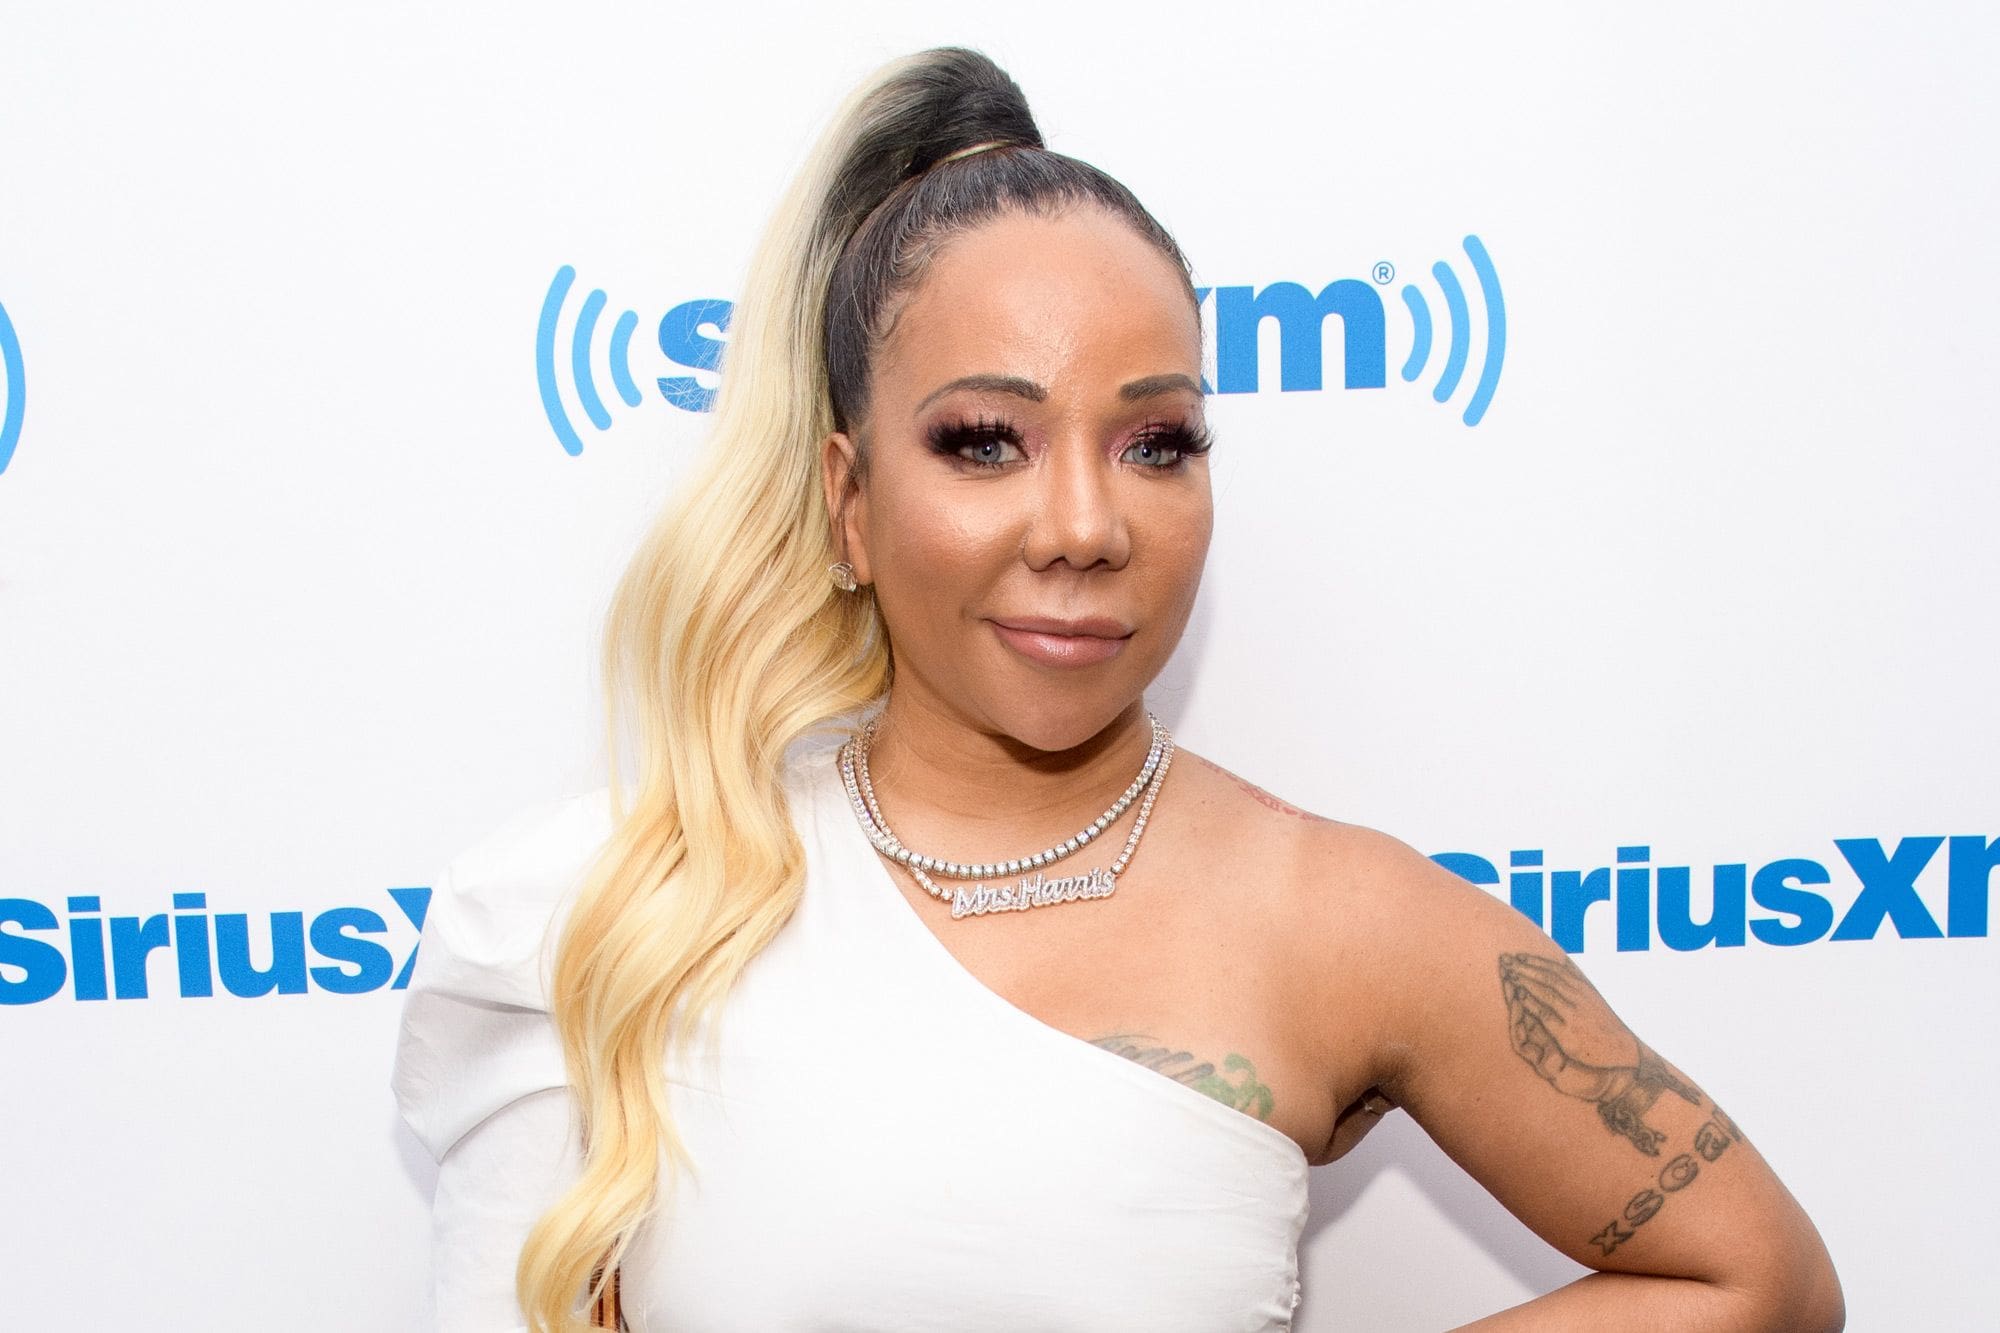 tiny-harris-shared-a-prank-video-involving-her-mom-check-it-out-here